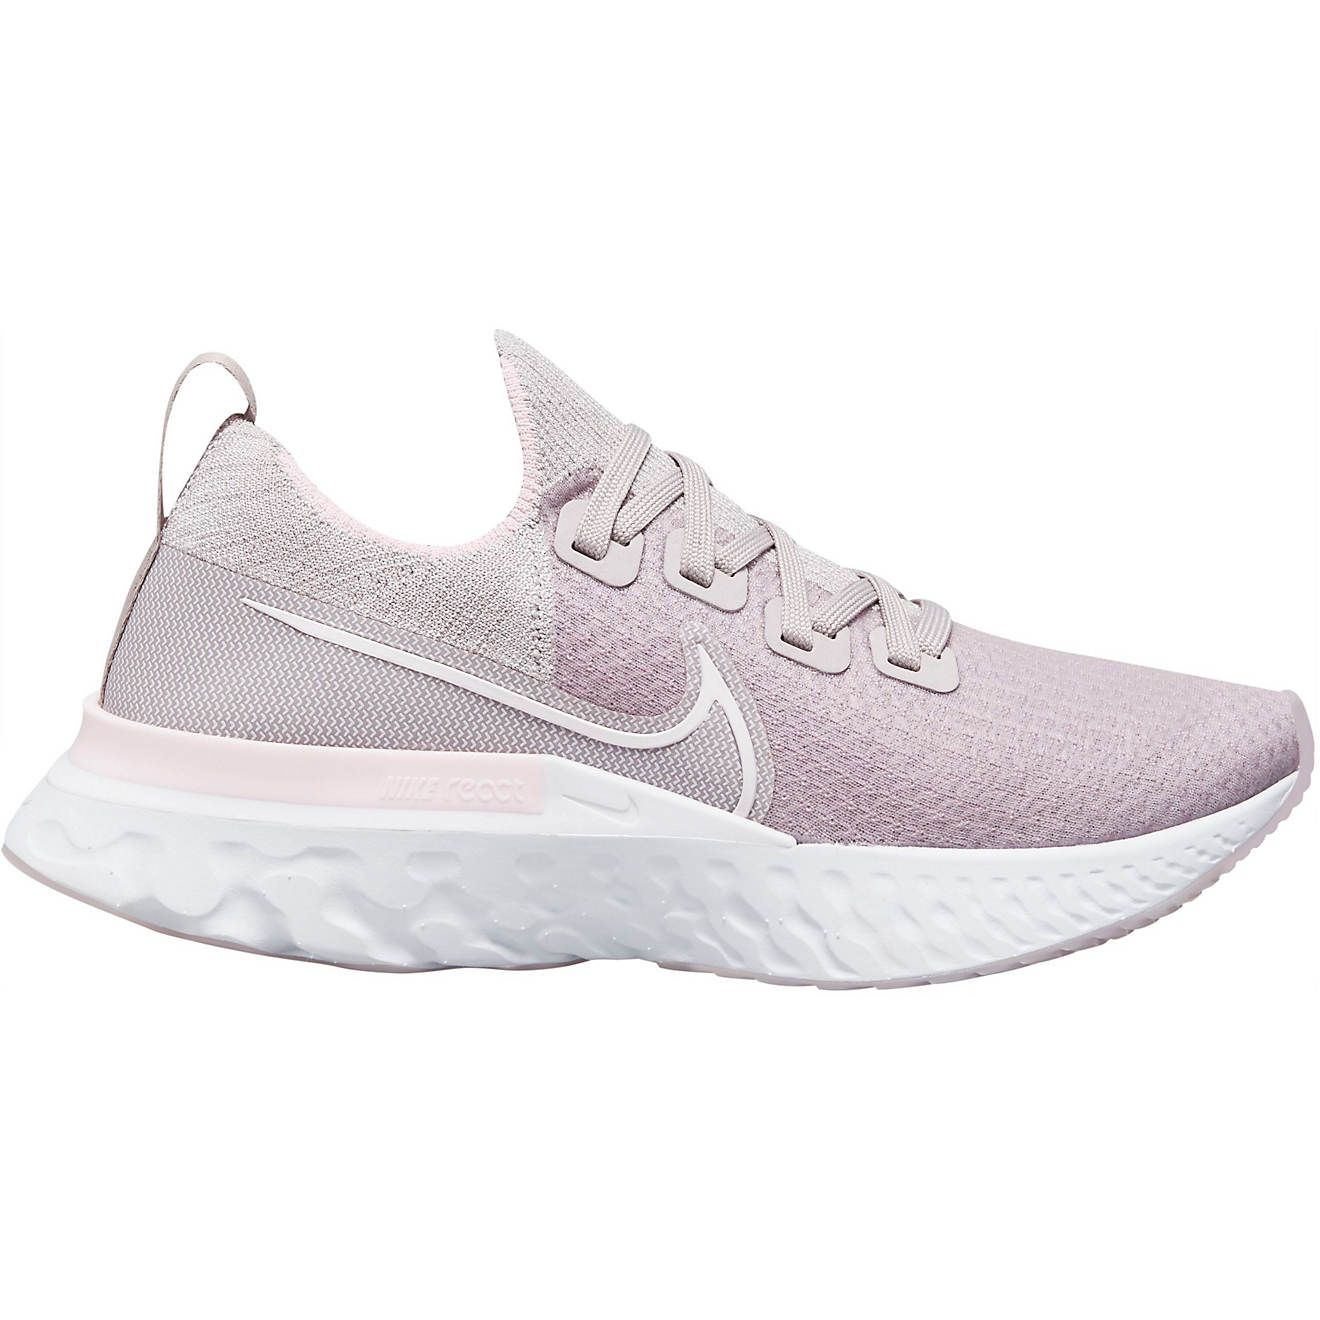 Nike Women's React Infinity Running Shoes | Academy Sports + Outdoor Affiliate